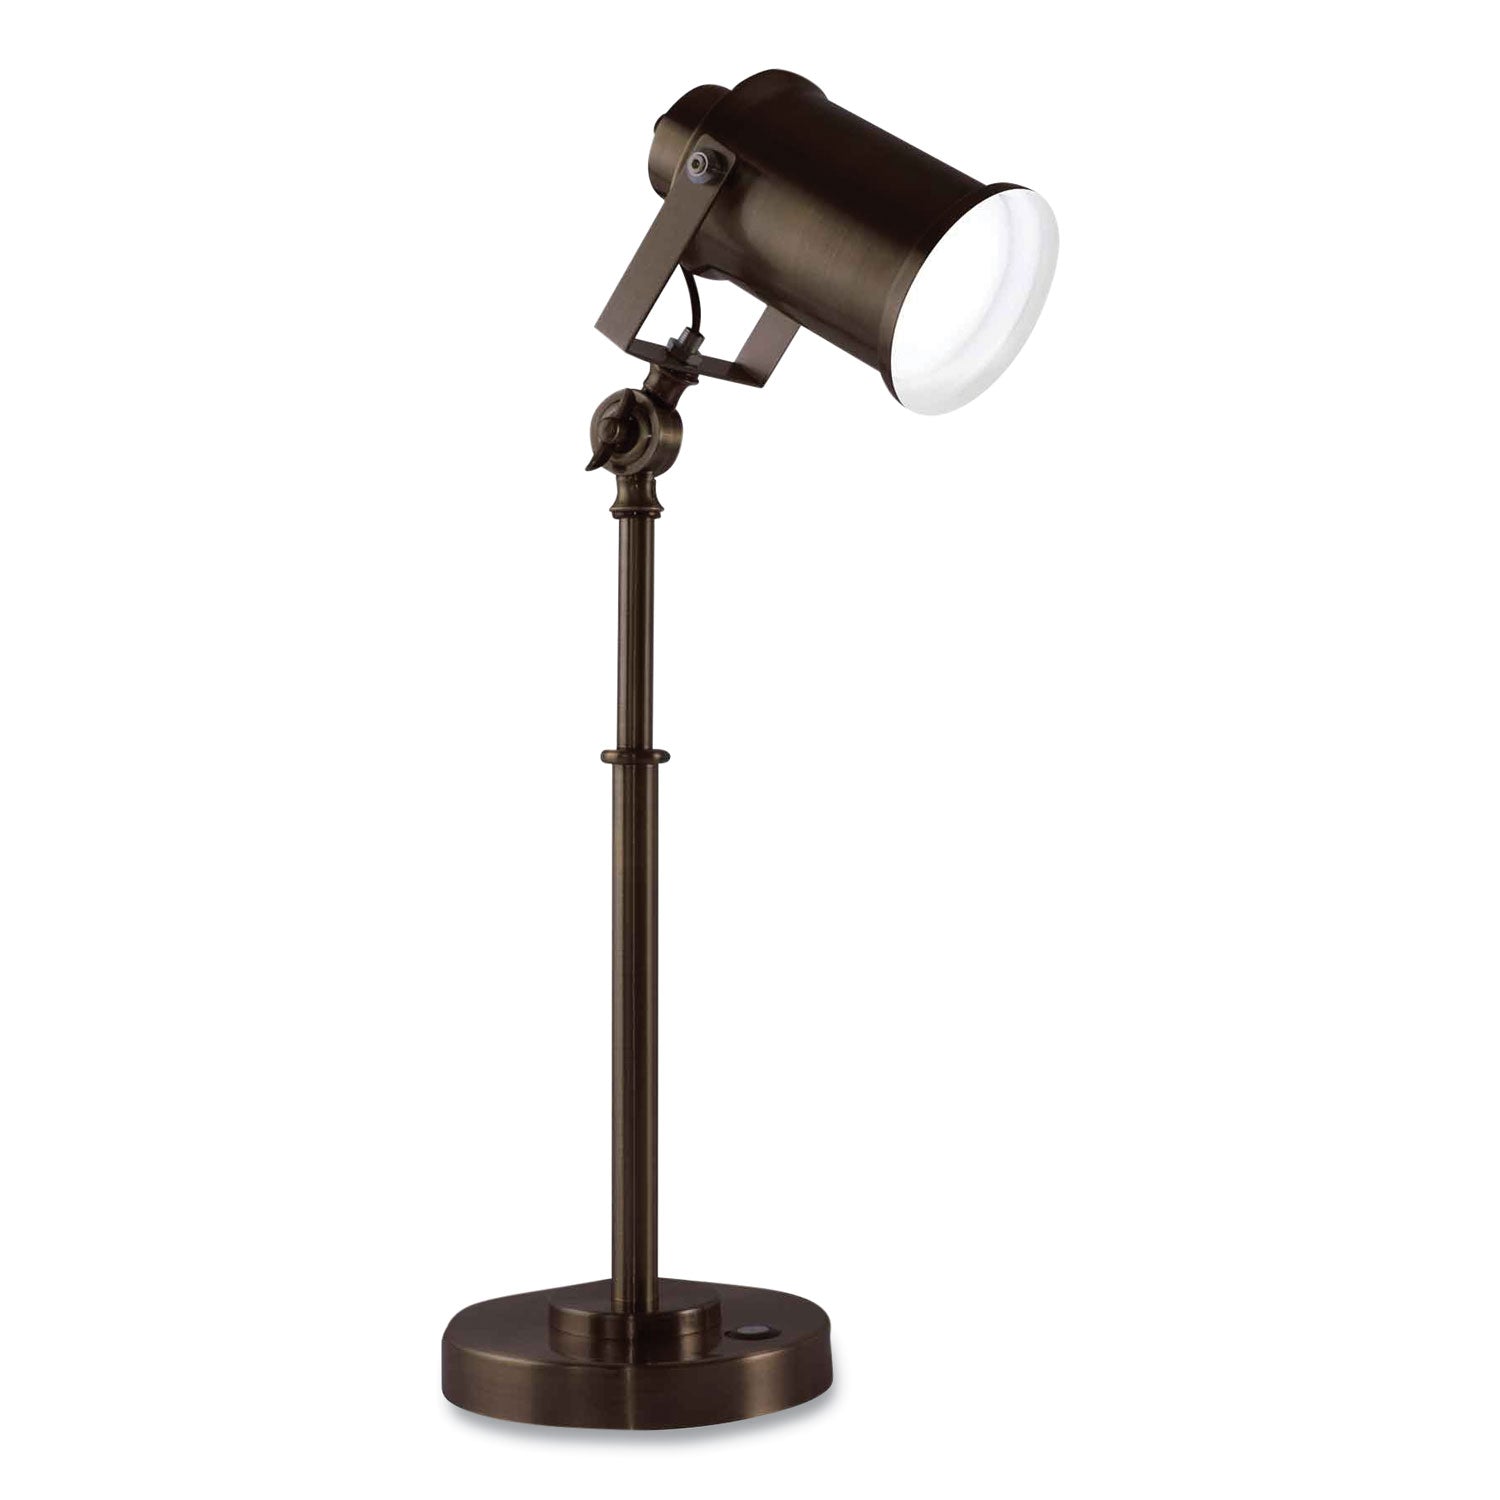 wellness-series-restore-led-desk-lamp-9-to-22-rubbed-bronze-ships-in-4-6-business-days_ottcs01rb9shpr - 1